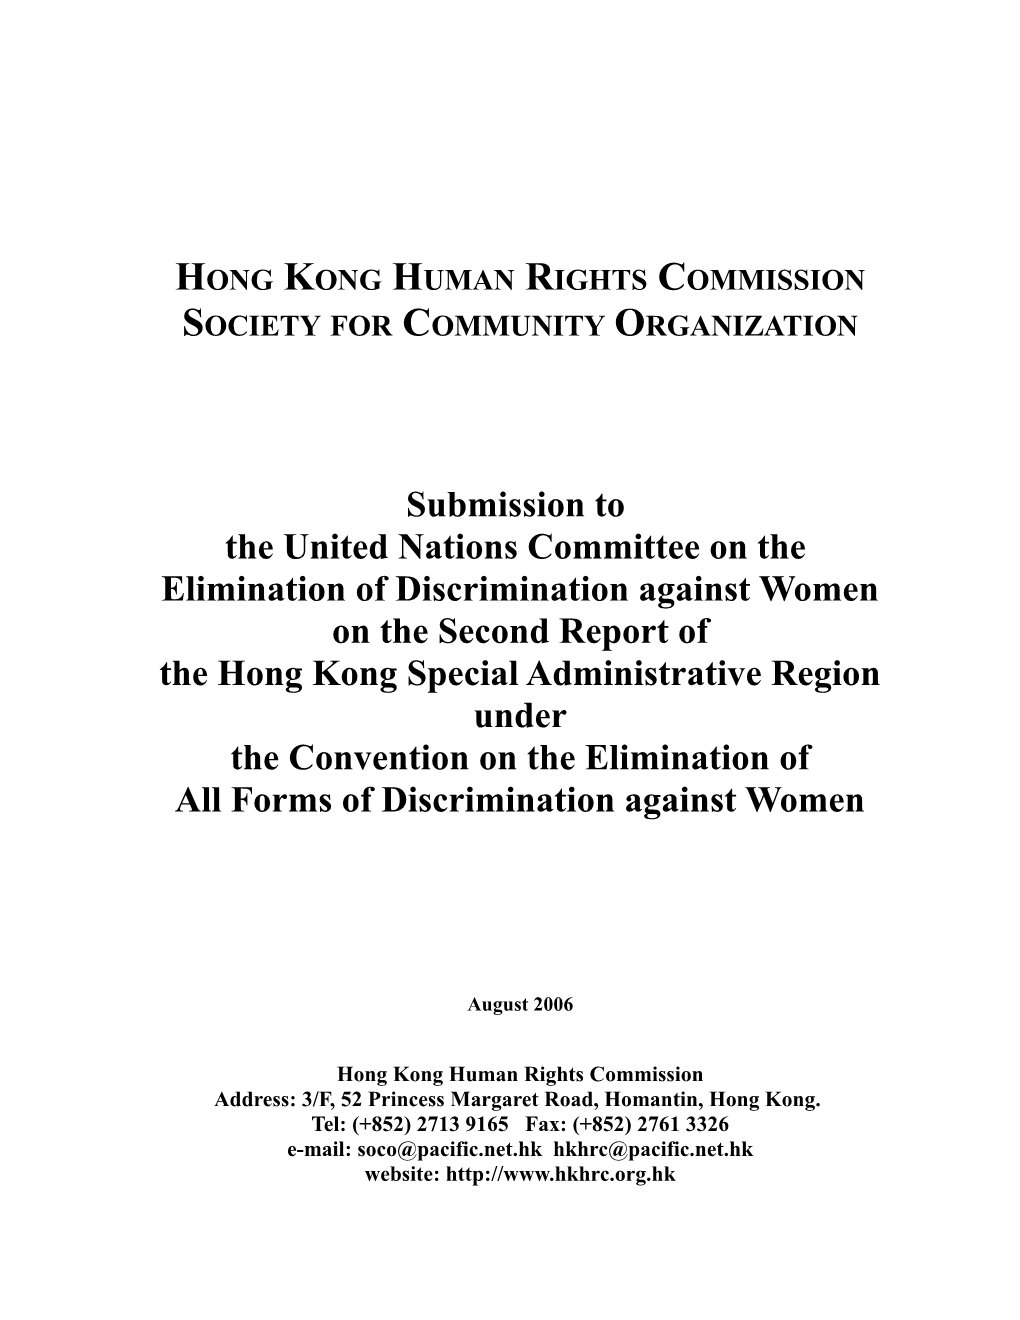 HKHRC, Soco Submission to the UN Committee on the Elimination of Discrimination Against